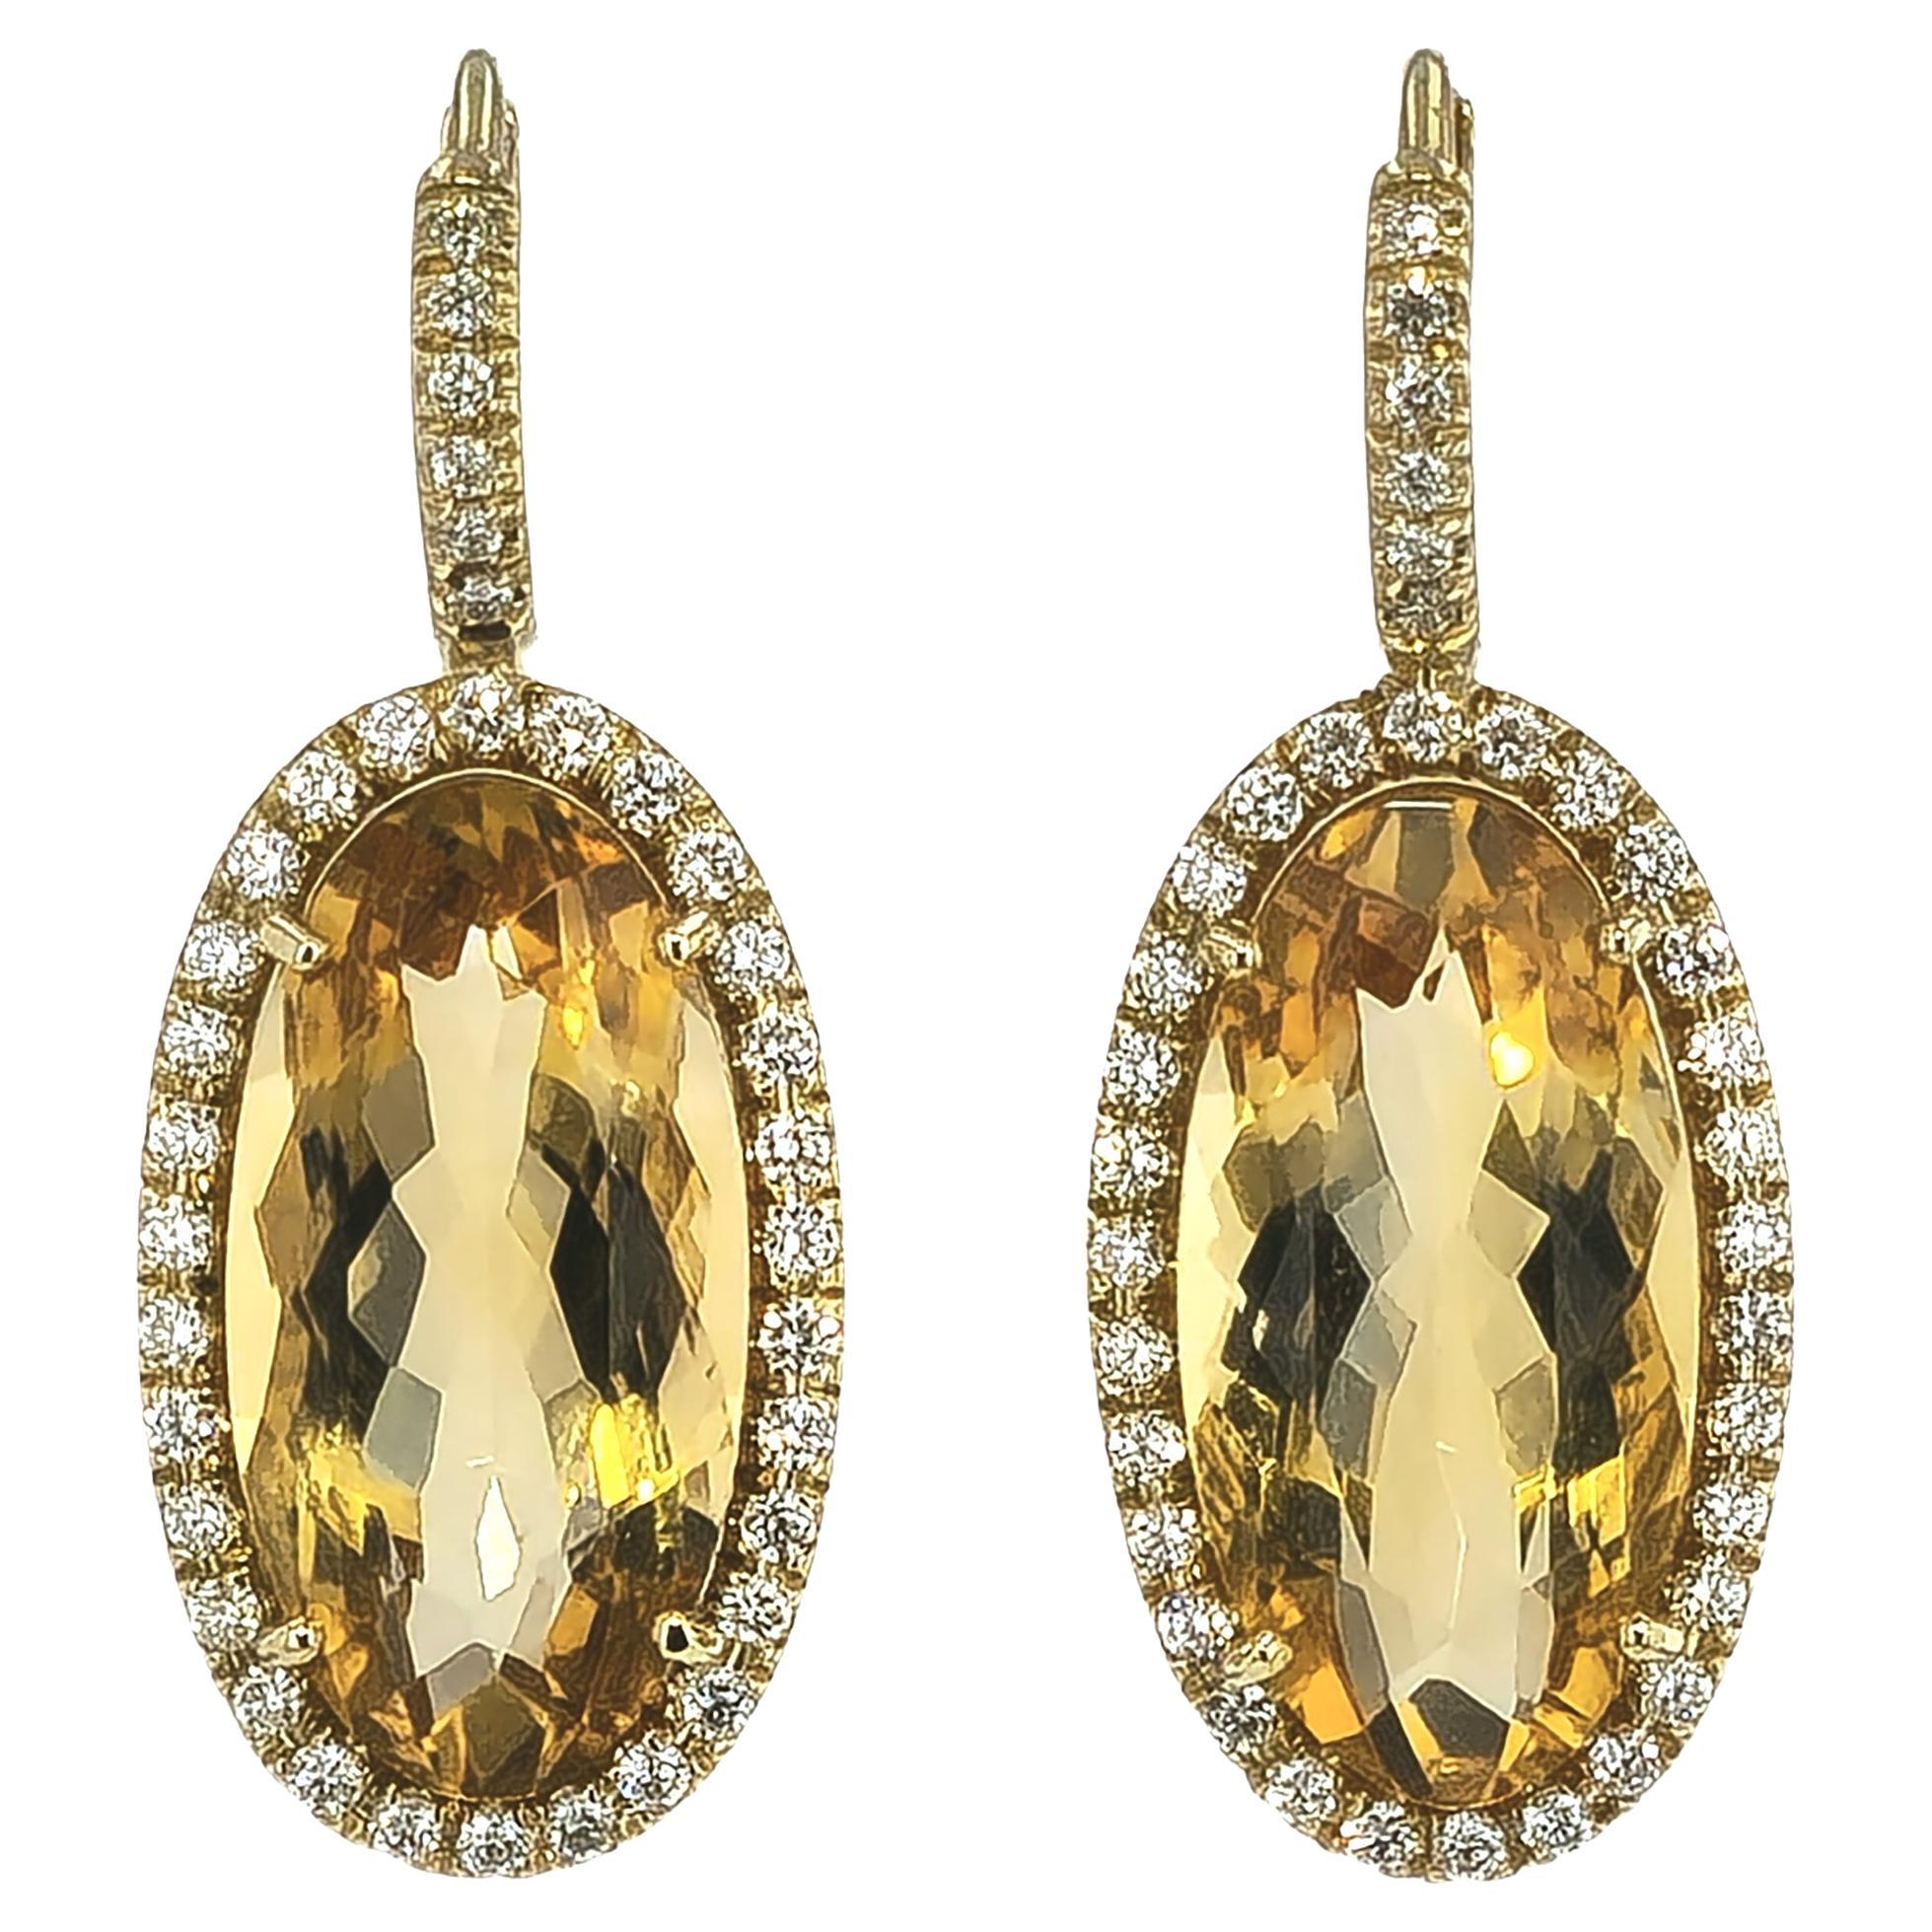 Draw attention to all the right places with these magnificent Elongated Oval Citrine Diamond Pave Drop Earrings. Handcrafted H&H Collection in 18 karat yellow gold, the earrings feature an elongated oval-shaped citrine centerpiece, surrounded by a